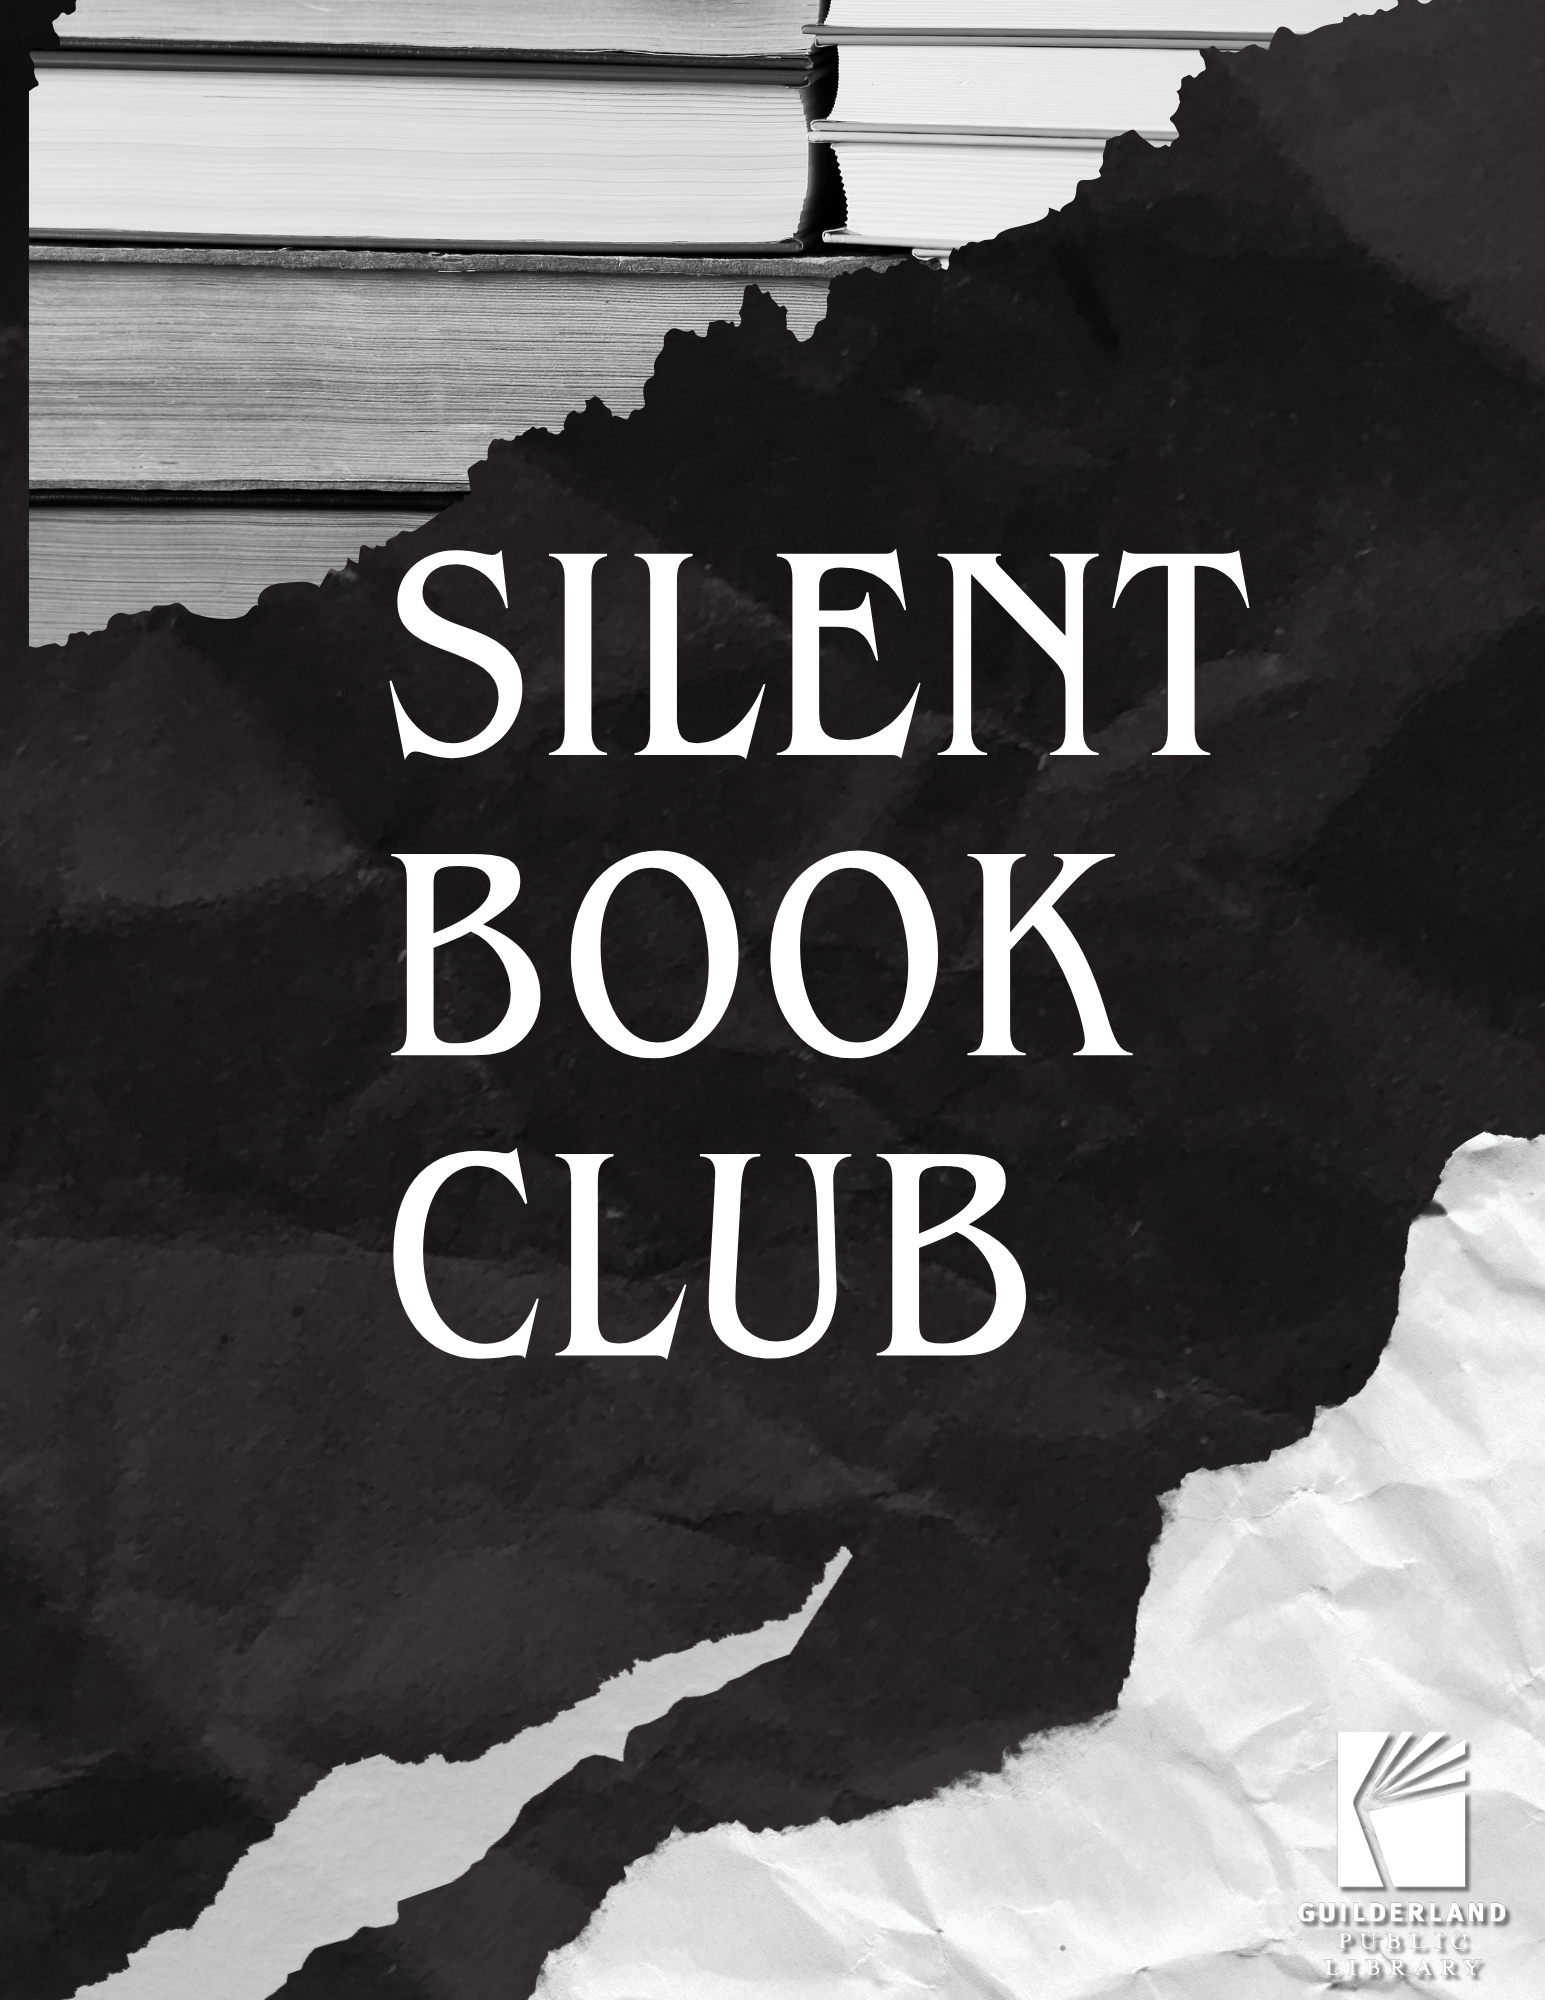 Silent Book Club on black background with books stacked in top left corner and torn page in bottom right corner